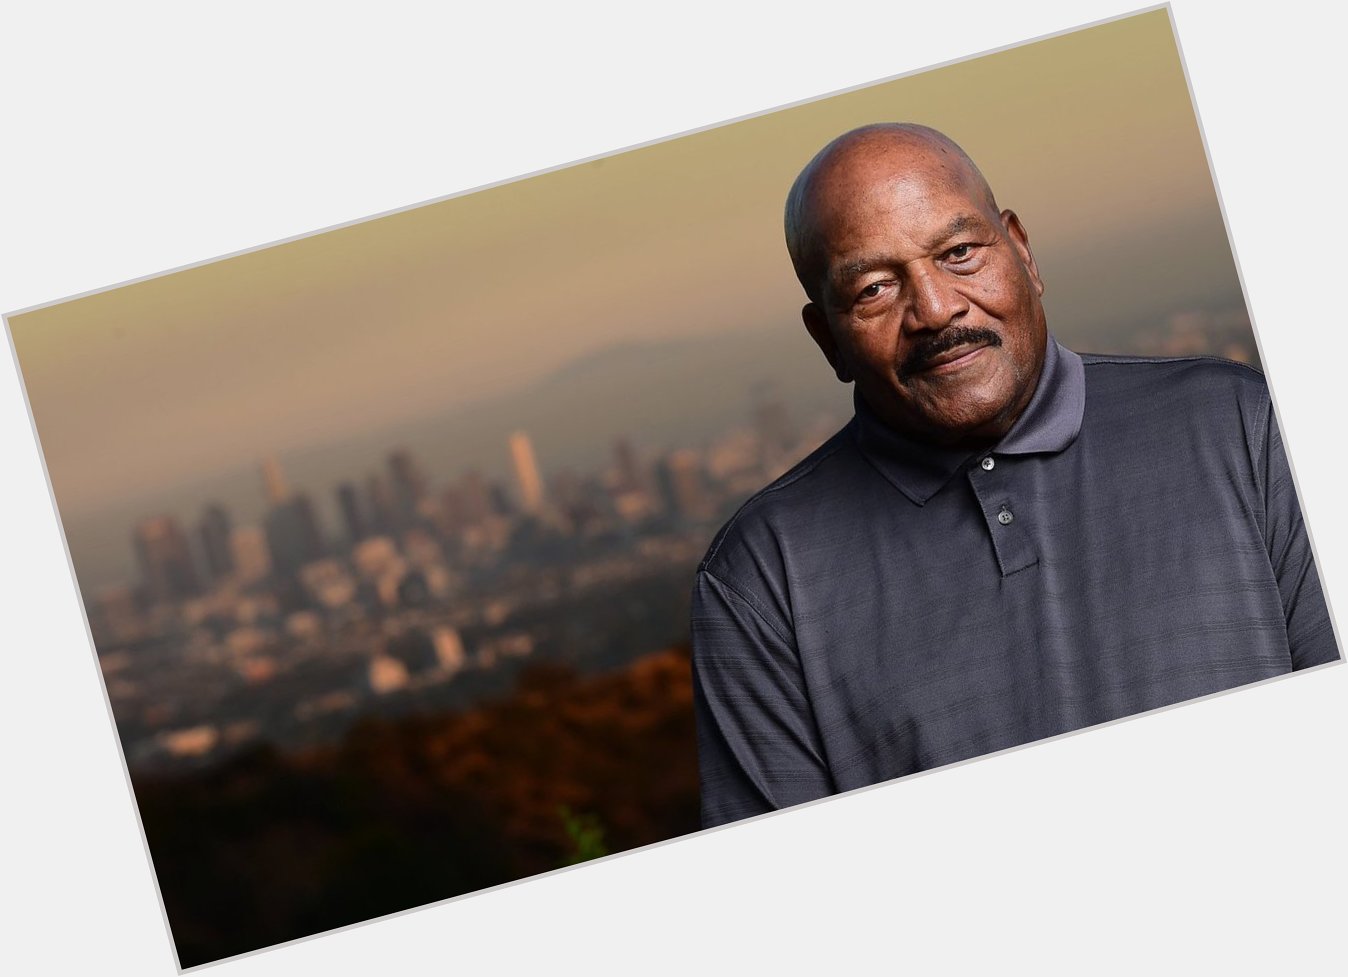  ON WITH Wishes:
Jim Brown A Happy Birthday! 